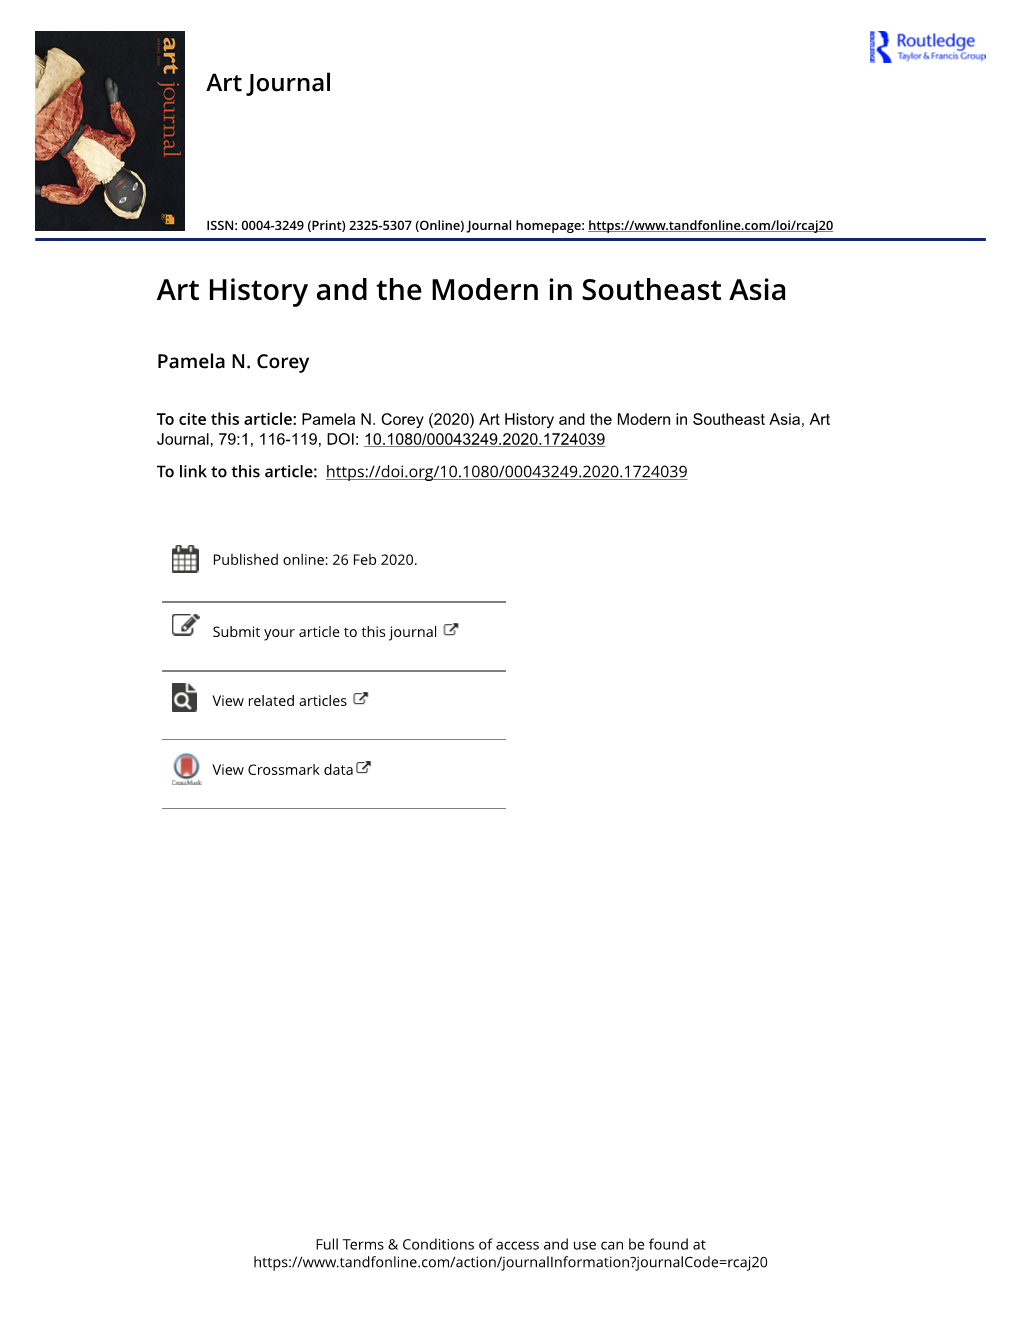 Art History and the Modern in Southeast Asia